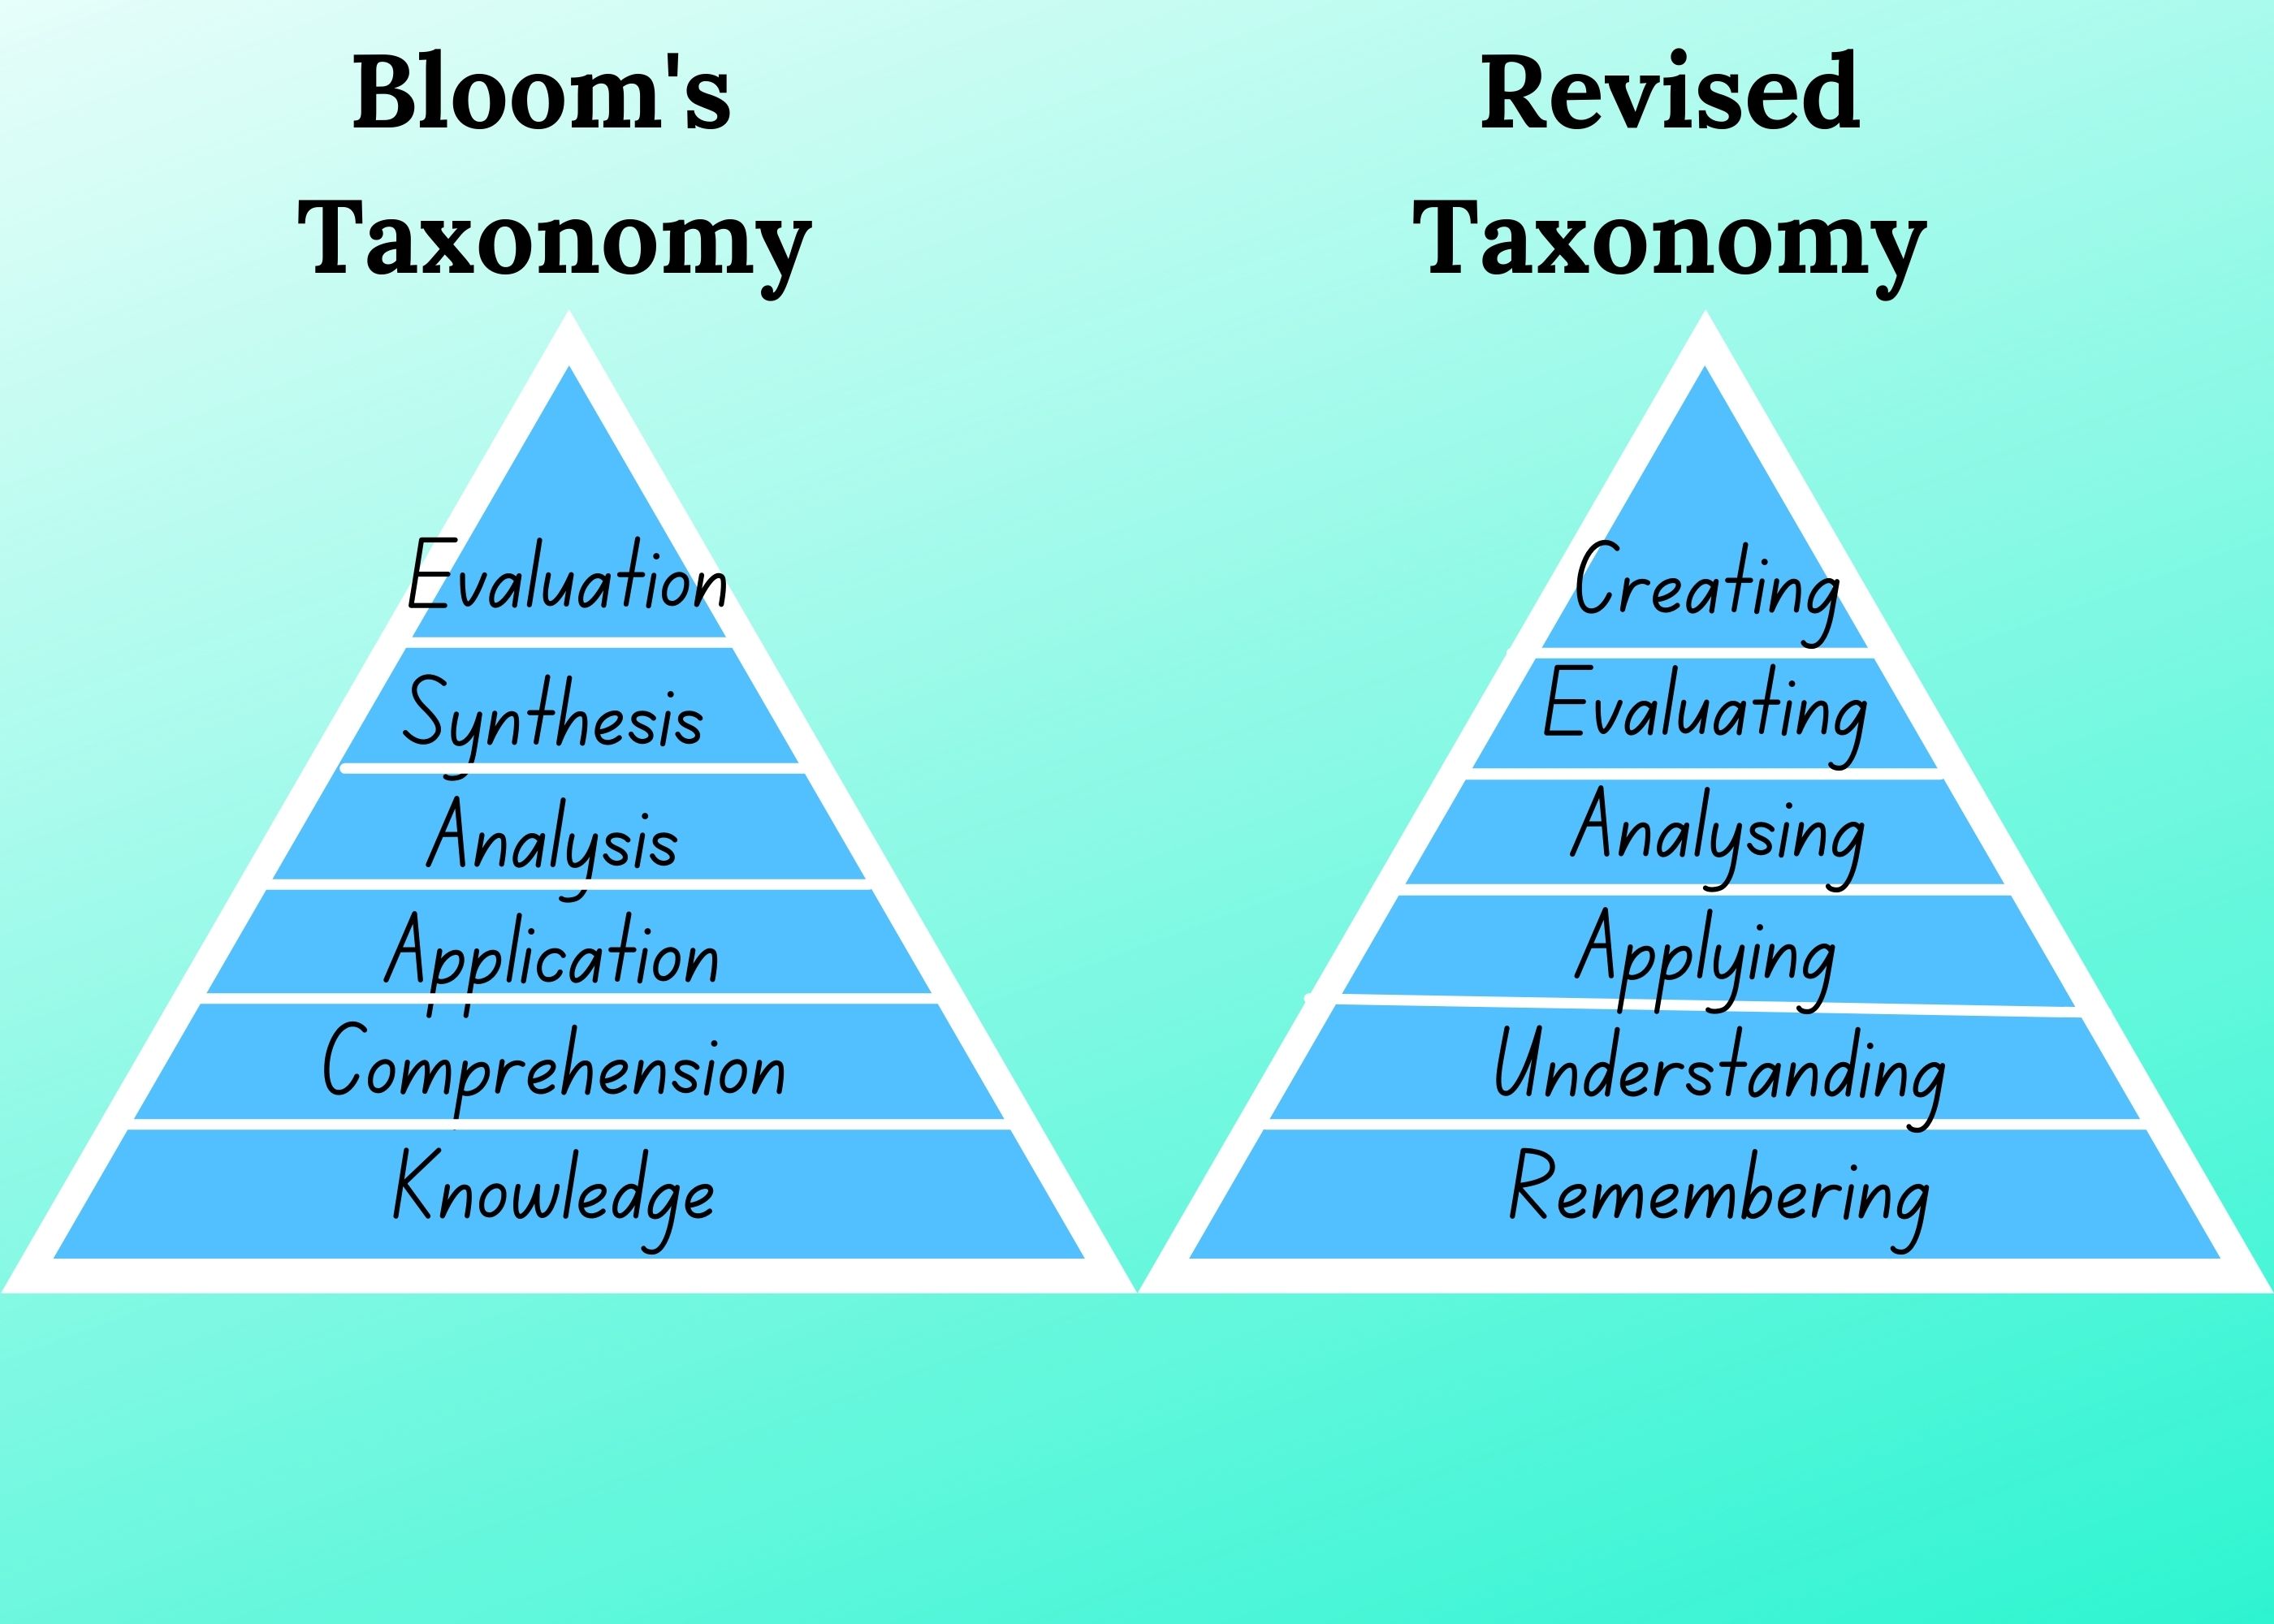 blooms taxonomy instructional design model e-learning